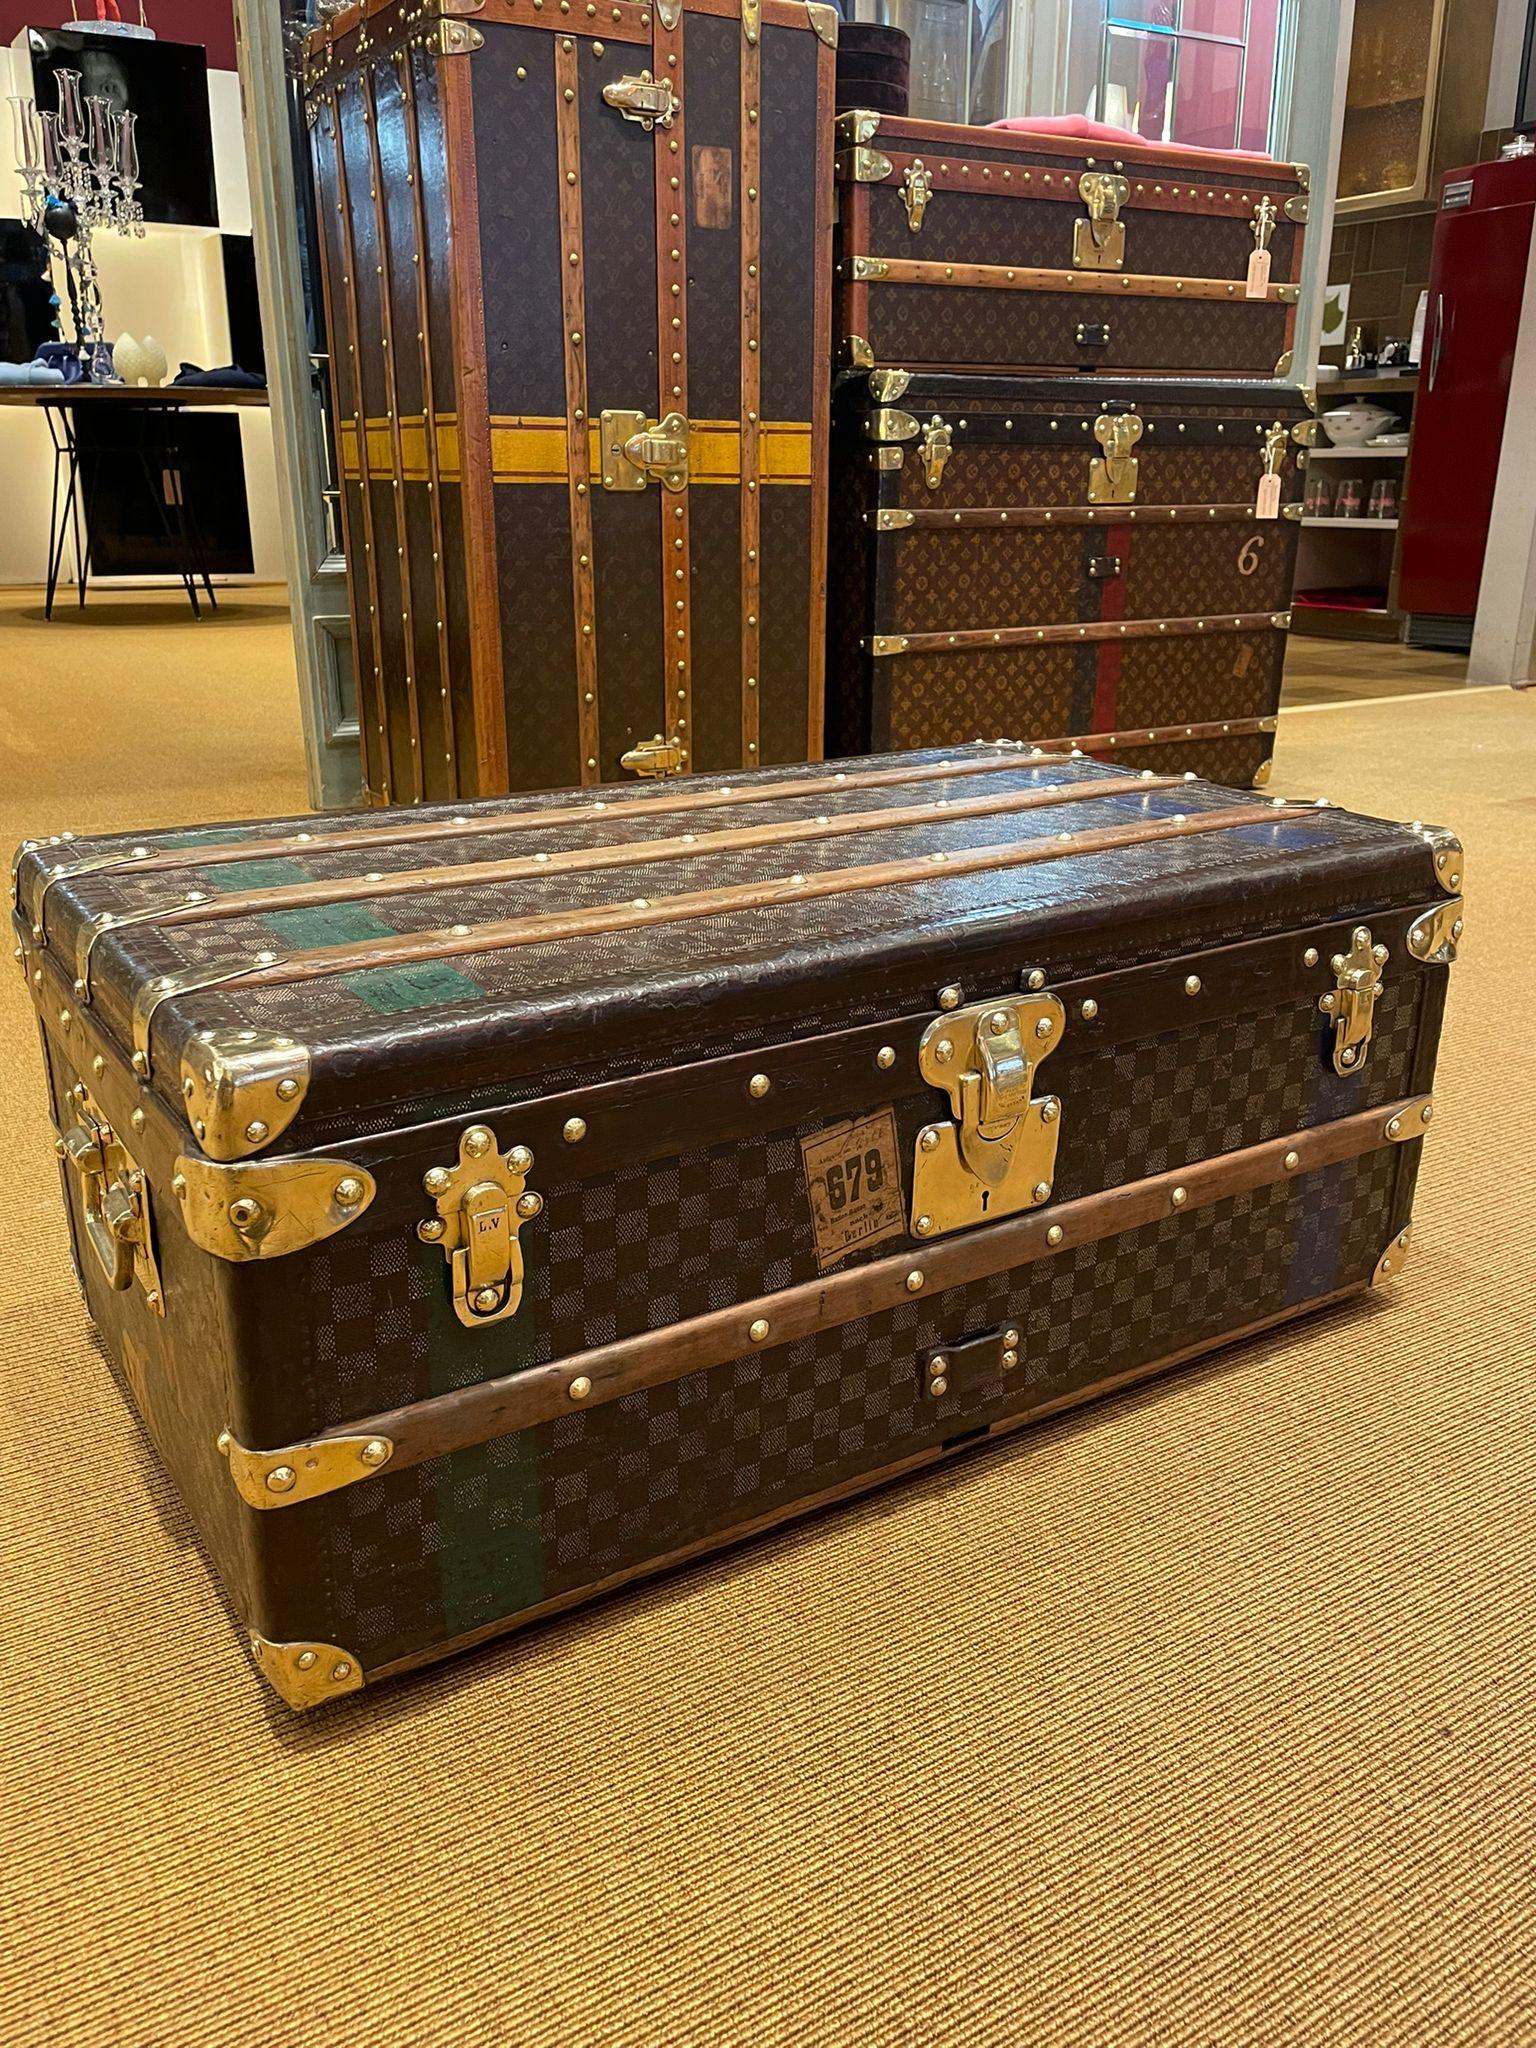 Louis Vuitton's elegant and exclusive Malle Cabine trunk, the Maison's travel icon. The sophisticated creation, with its compact design, was intended to be stowed under the cabin bed of an early 20th century ocean liner. This model that can now be